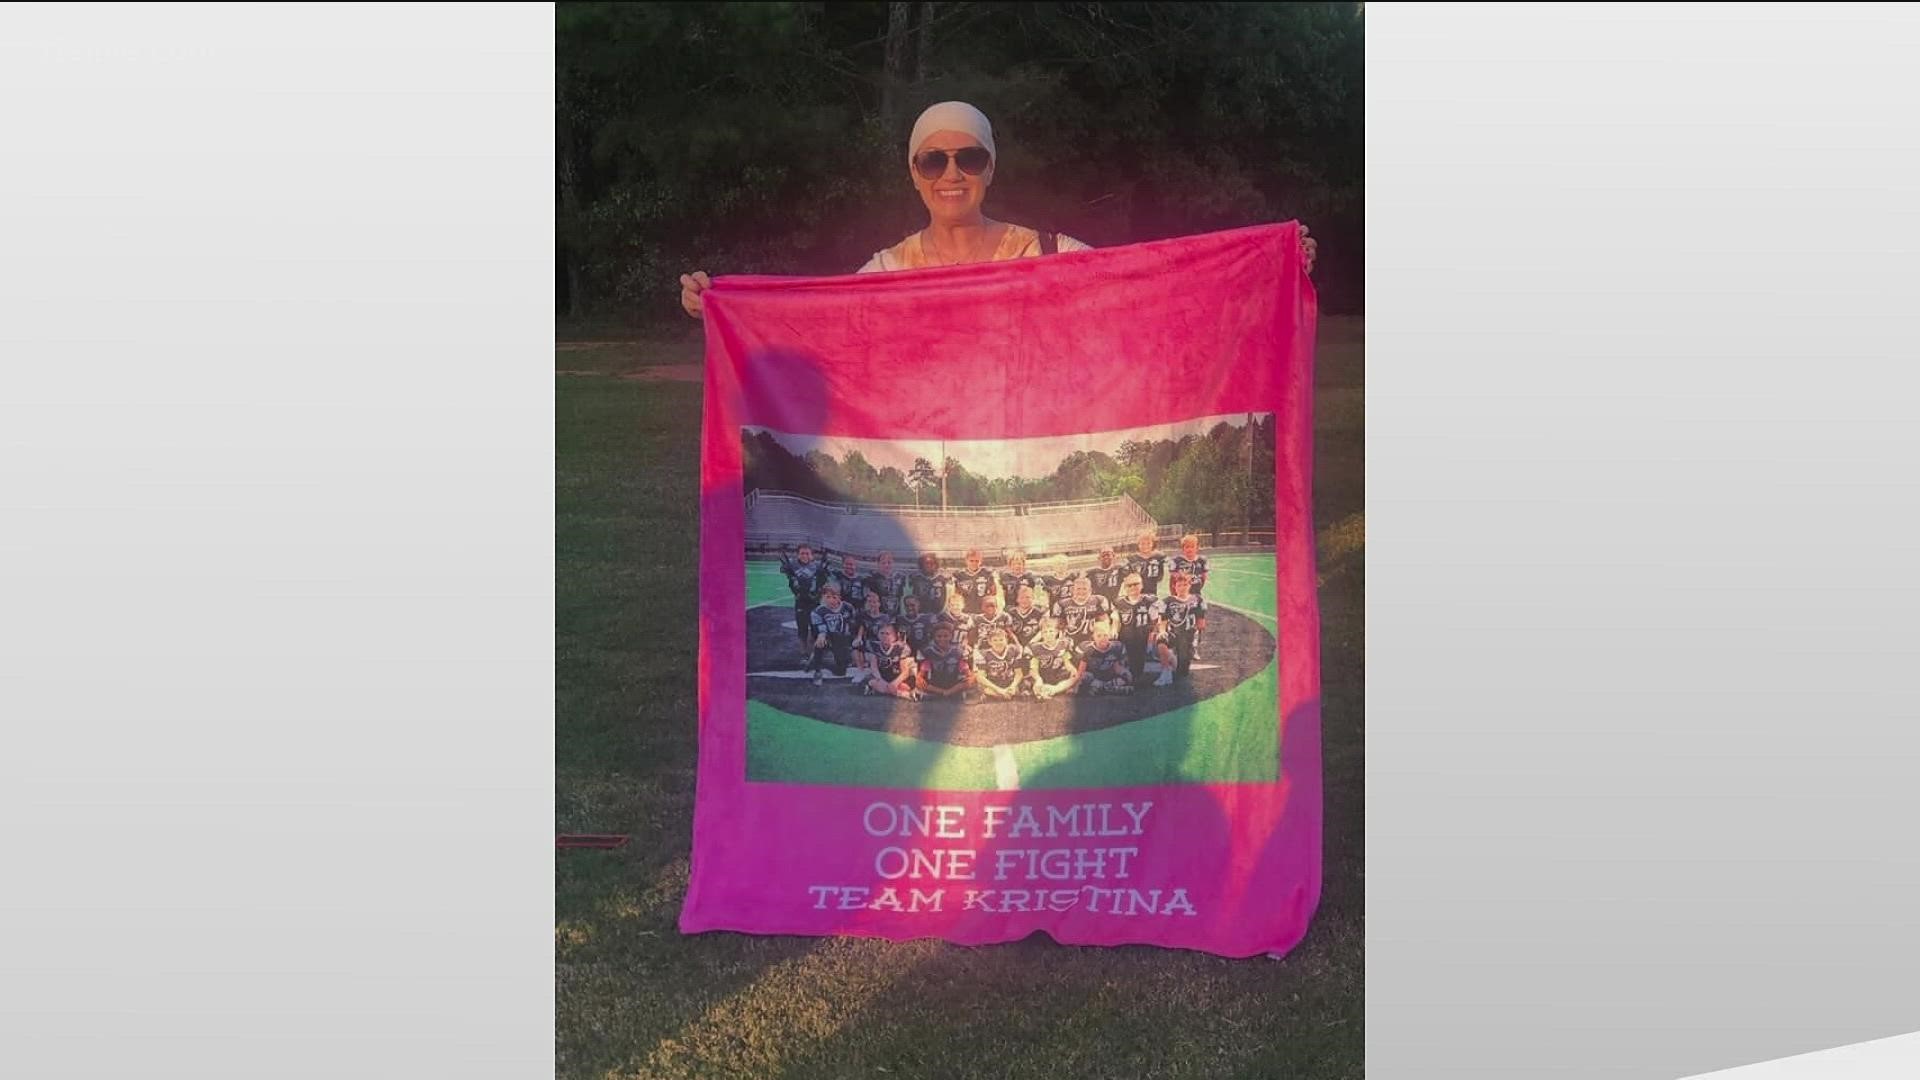 The East Paulding Raiders wanted to show their love and support by raising their own money to buy her a blanket with the team on the front.